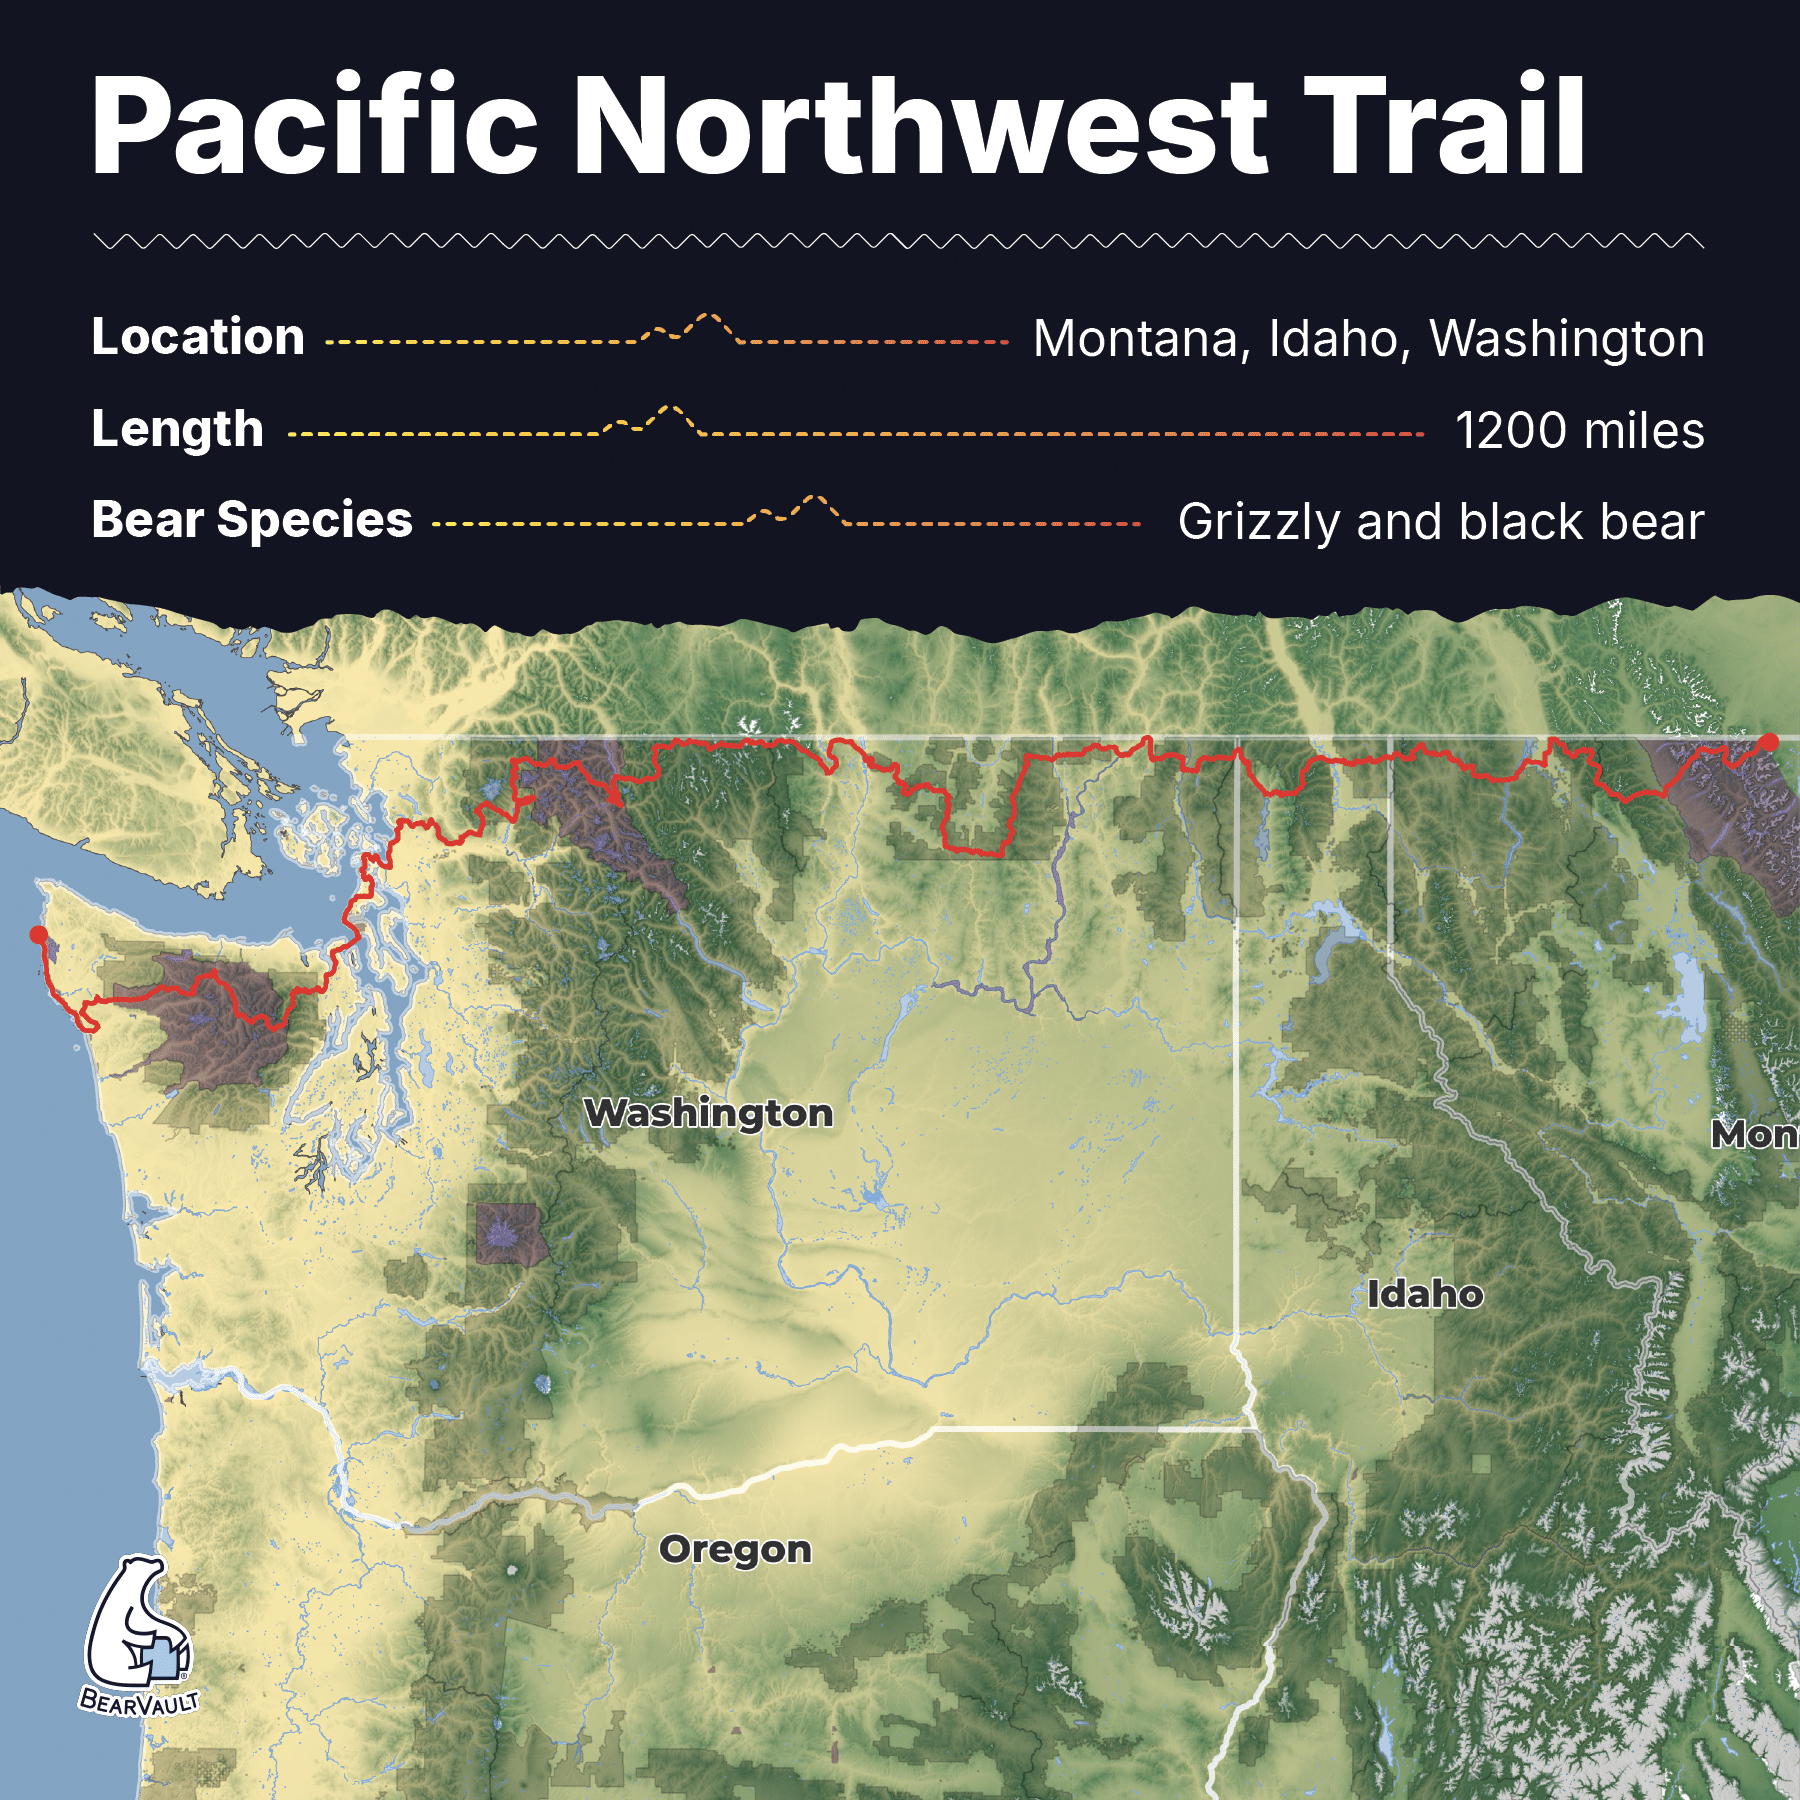 A trail map graphic showing a long hike in the Pacific Northwest.